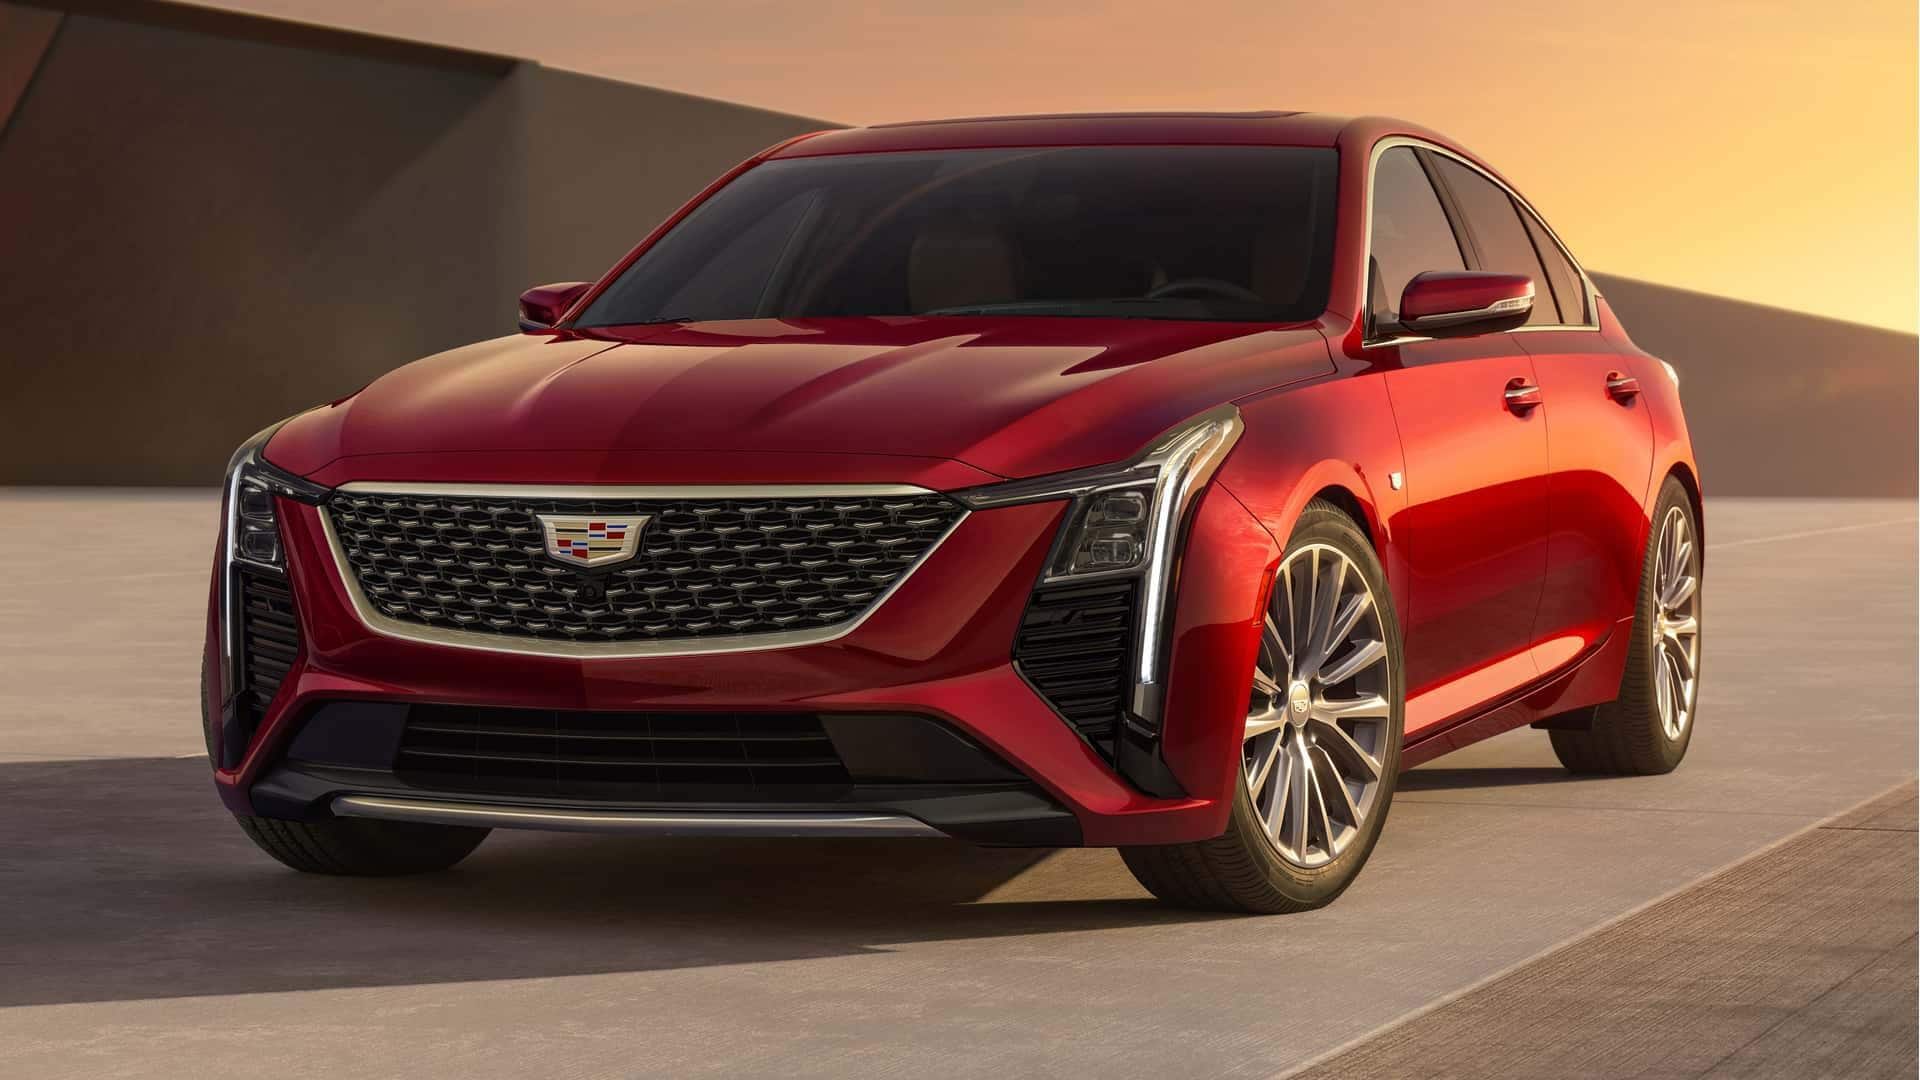 2025 Cadillac CT5 sedan goes official: Check features